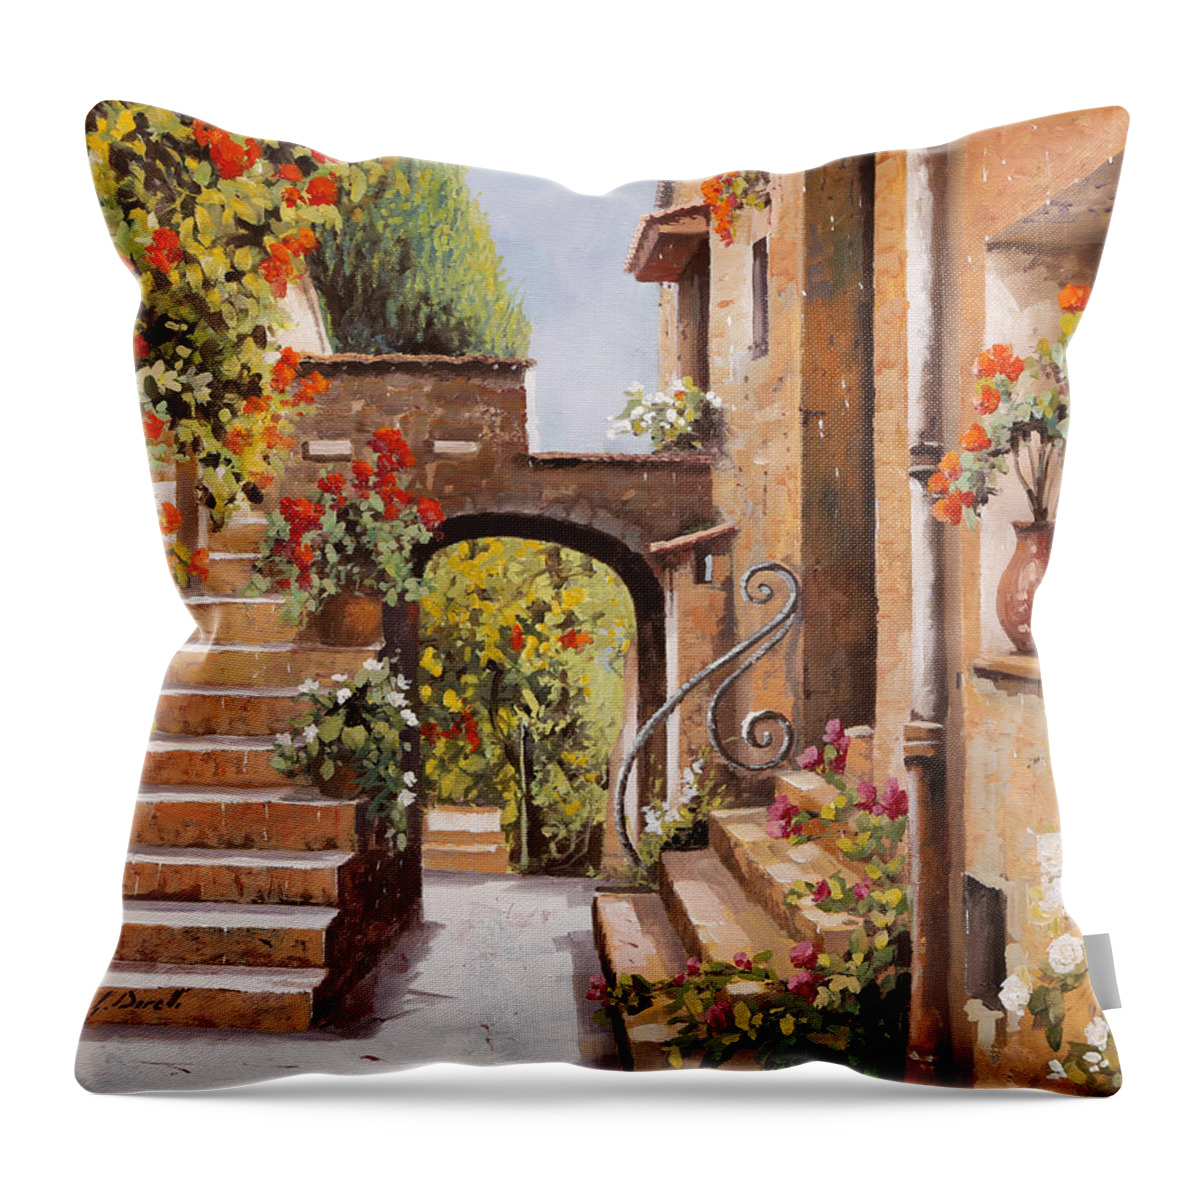 Cagnes Throw Pillow featuring the painting stradina di Cagnes by Guido Borelli